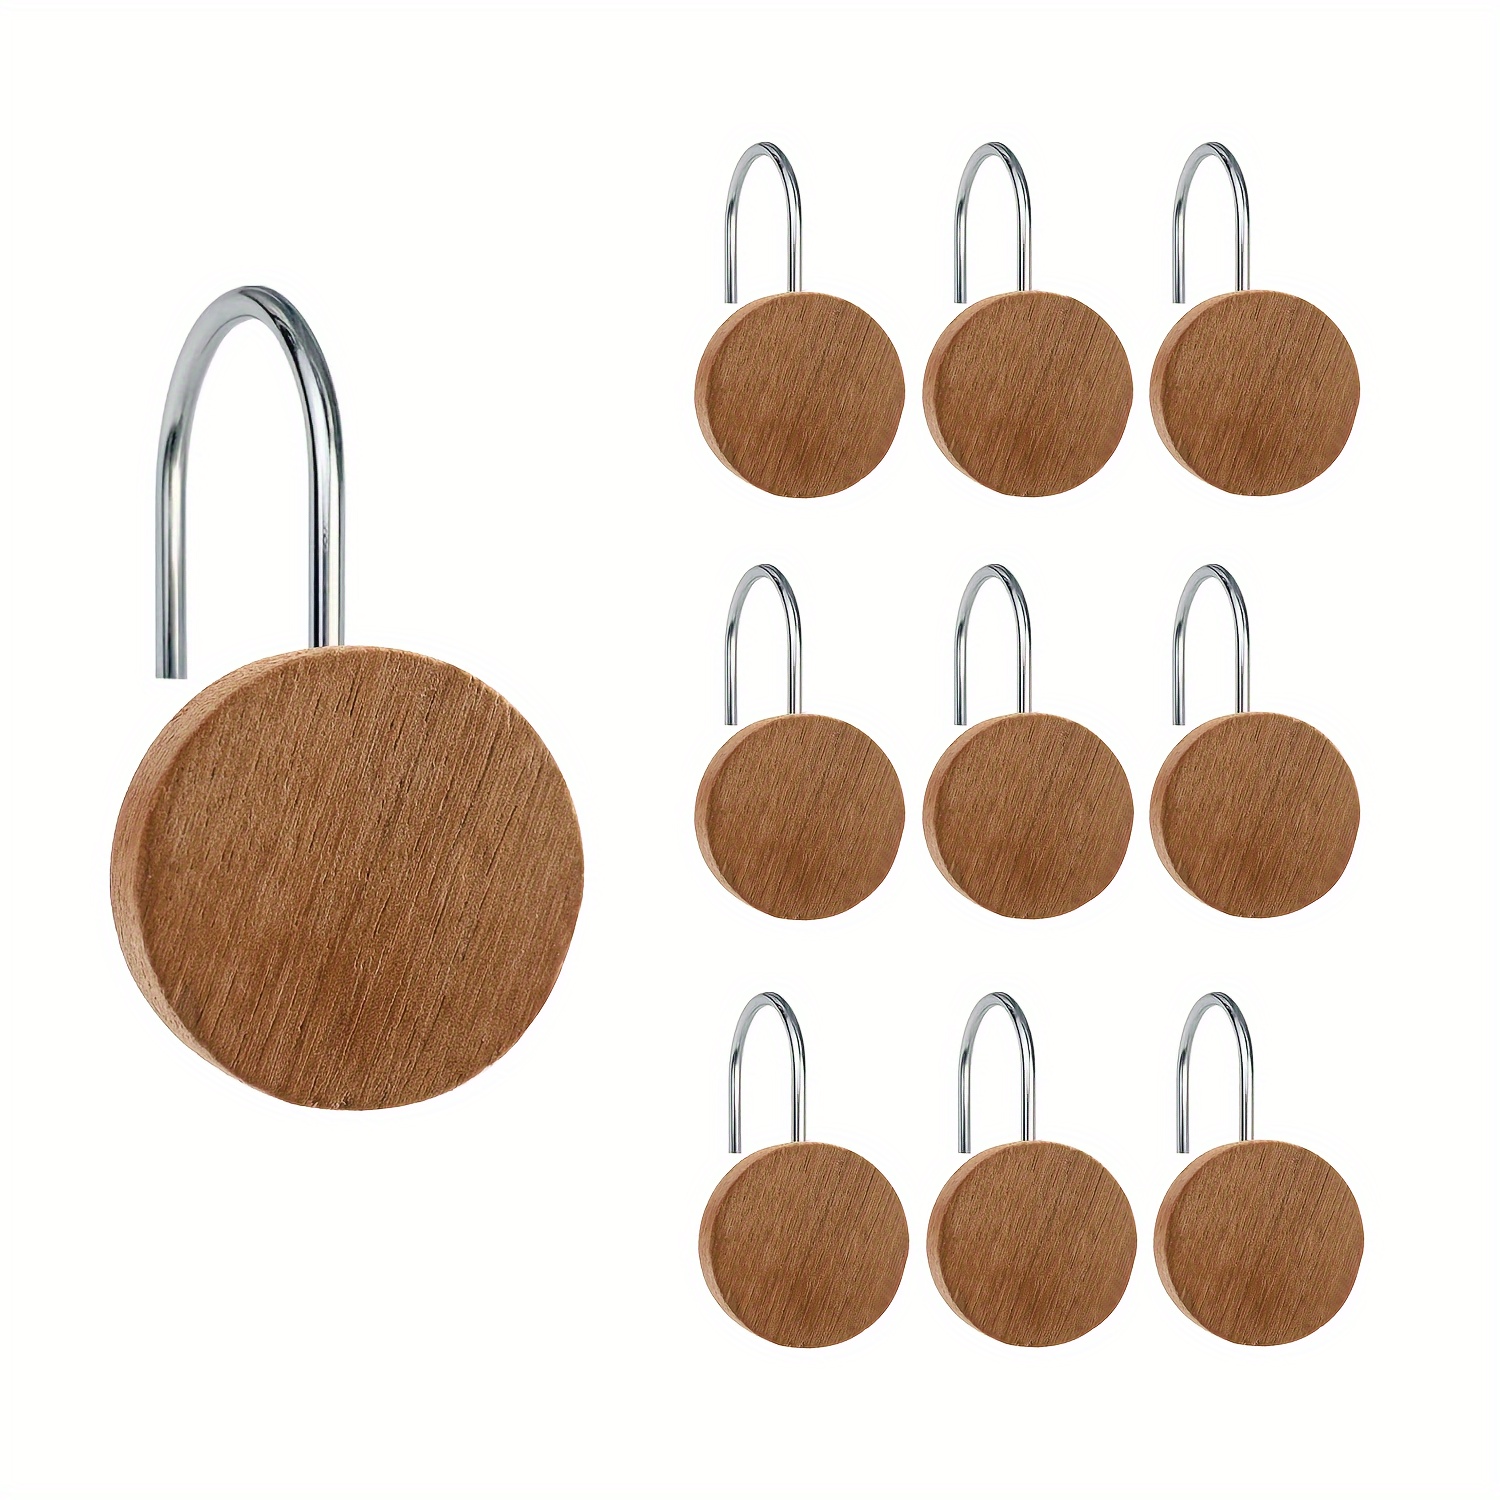 

12pcs Wood Grain Stainless Steel Shower Curtain Hooks, Rustic Round Decorative Bathroom Hangers, Strong Load-bearing & Rustproof With Handcraft Finish For Home & Bathroom Accessories